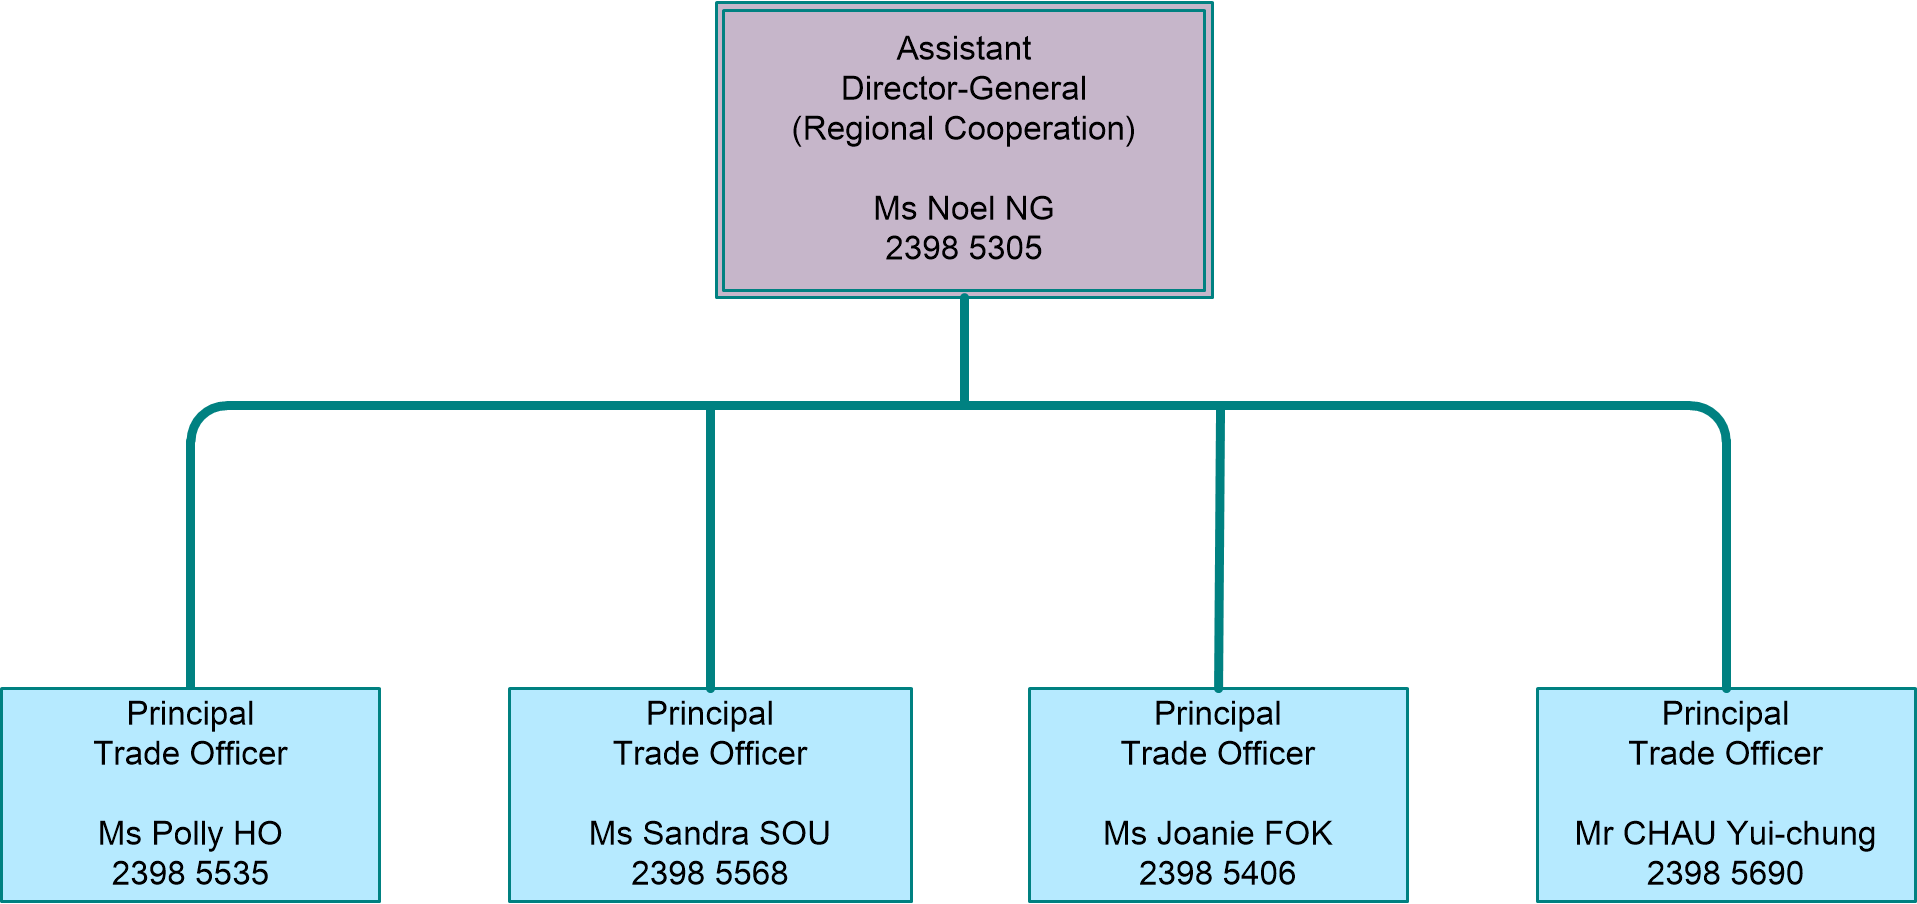 Regional Cooperation Division Organisation Chart (Please refer to below contents for description)